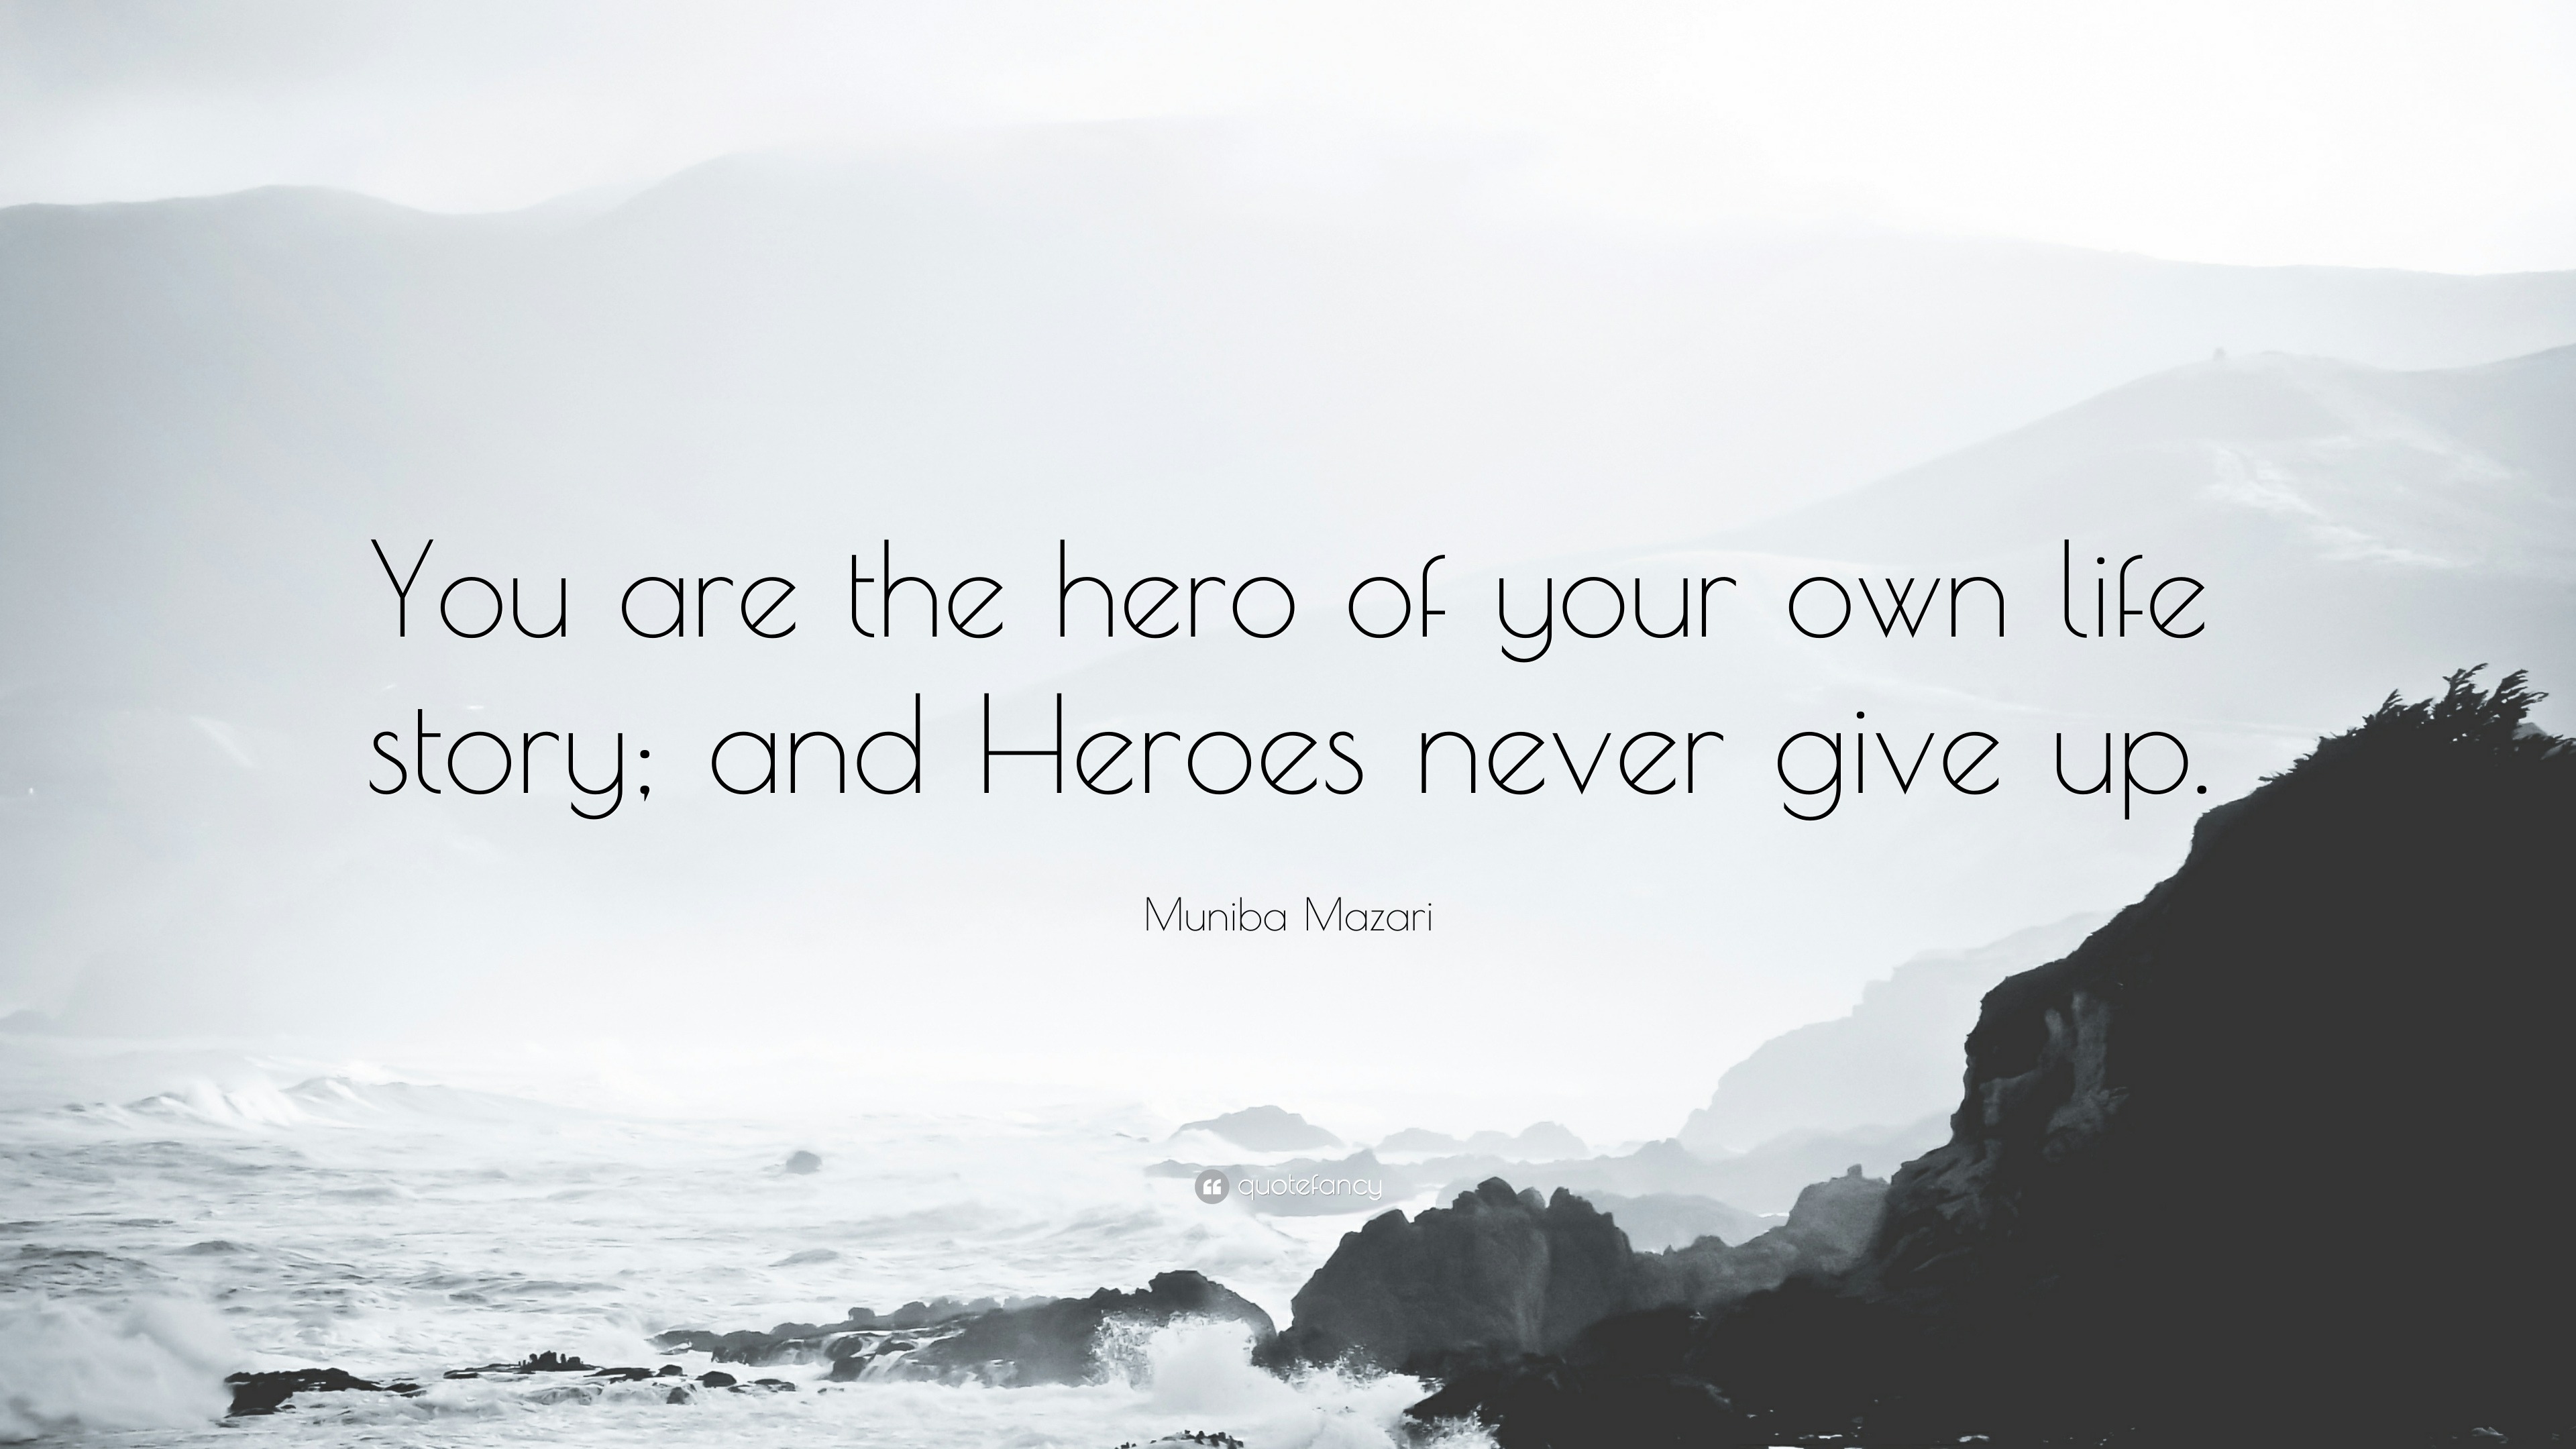 Muniba Mazari Quote: “You are the hero of your own life story; and Heroes  never give